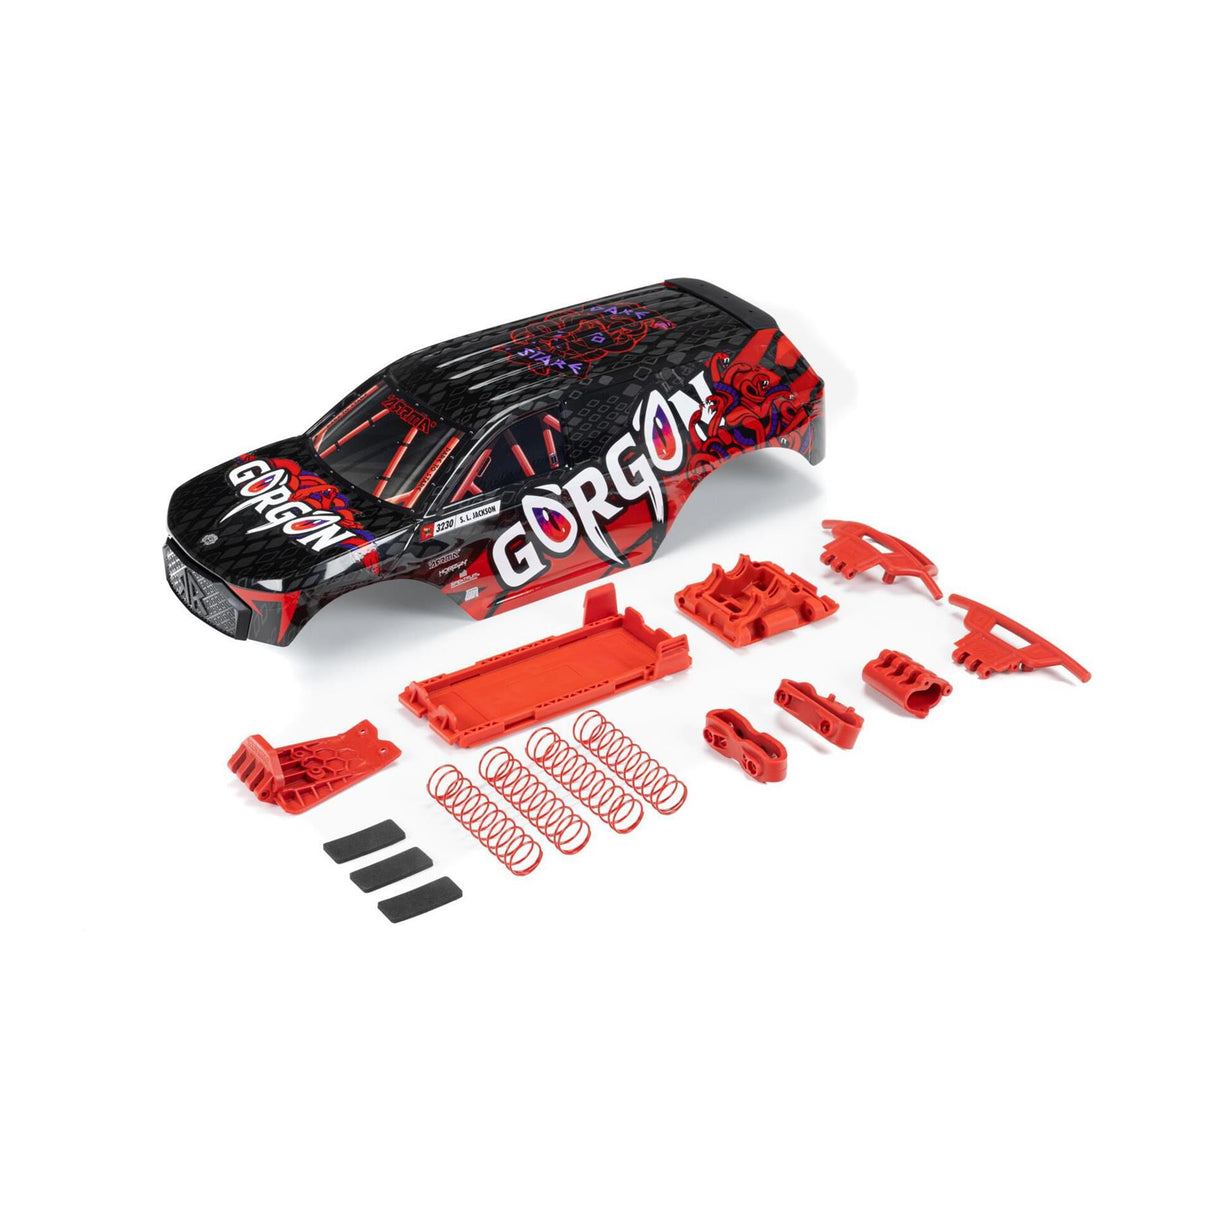 Arrma GORGON Painted Decaled Trimmed Body Set, Black / Red